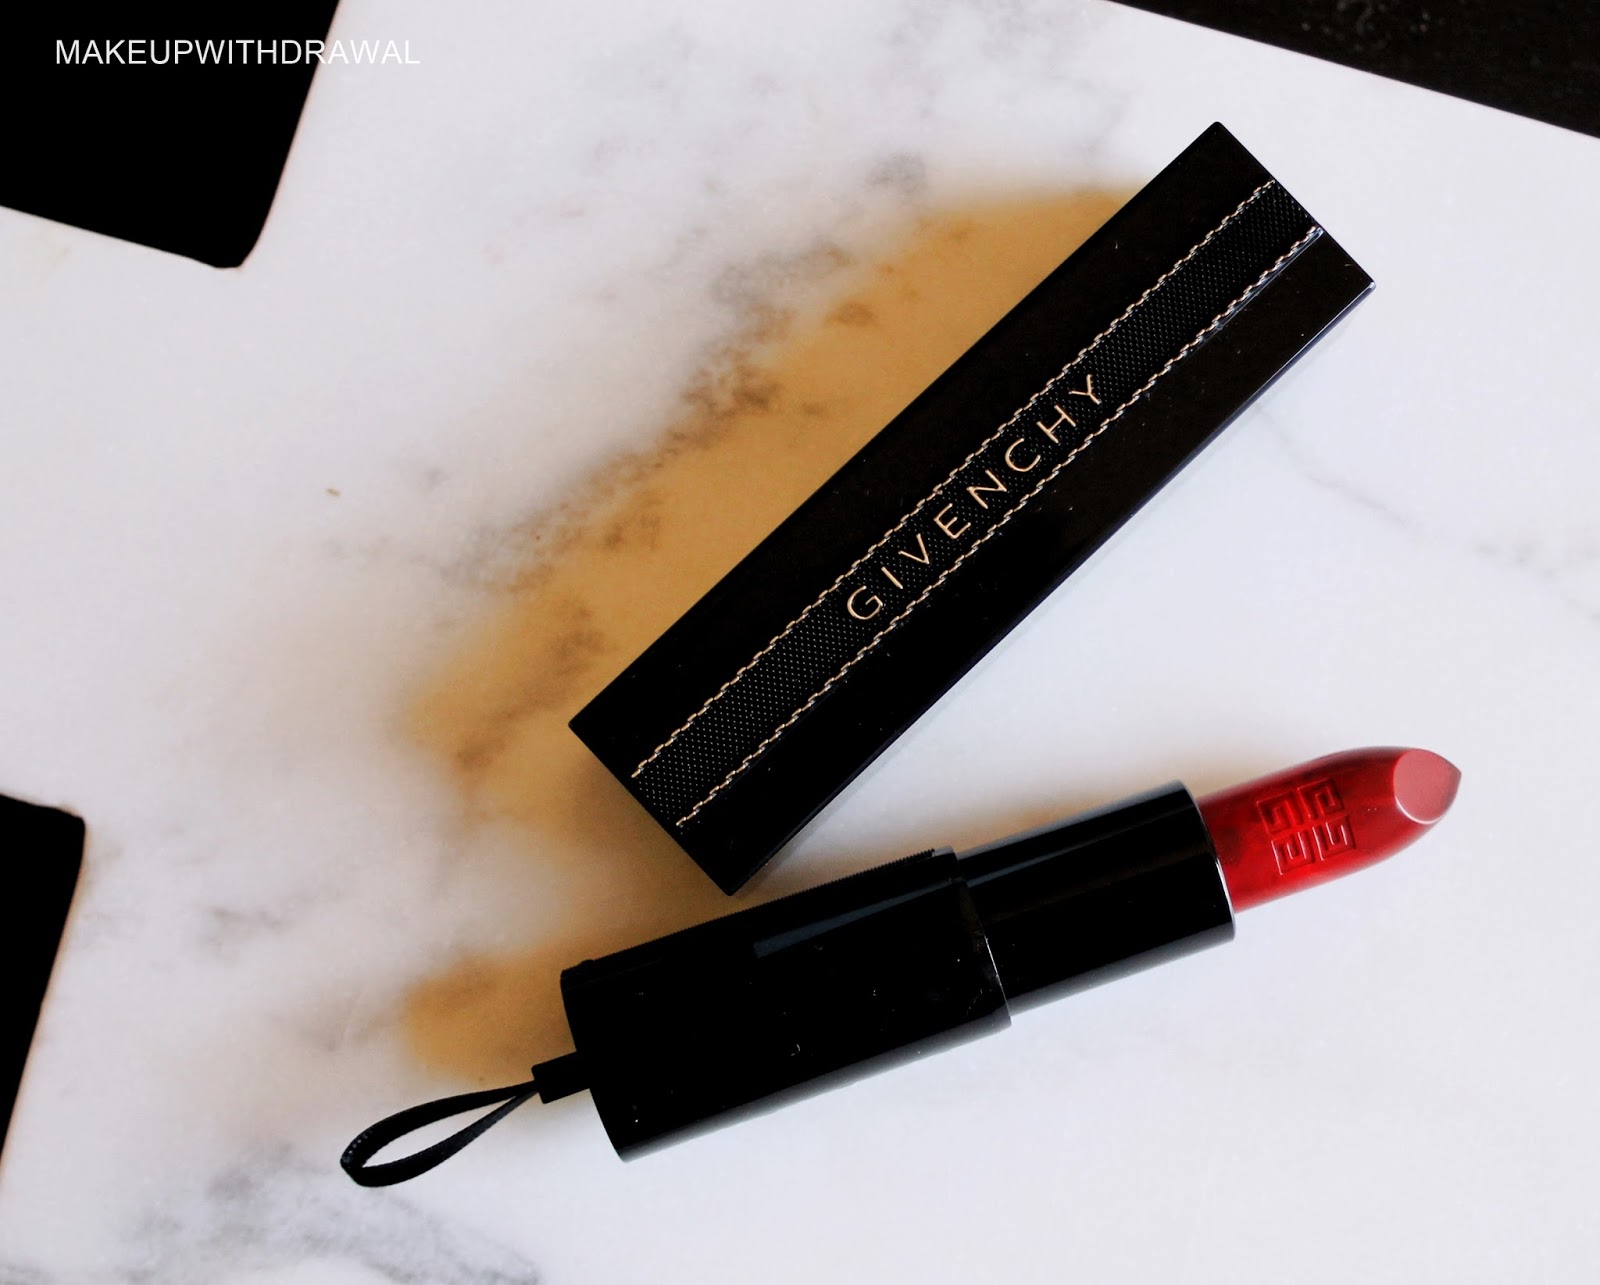 givenchy marble lipstick